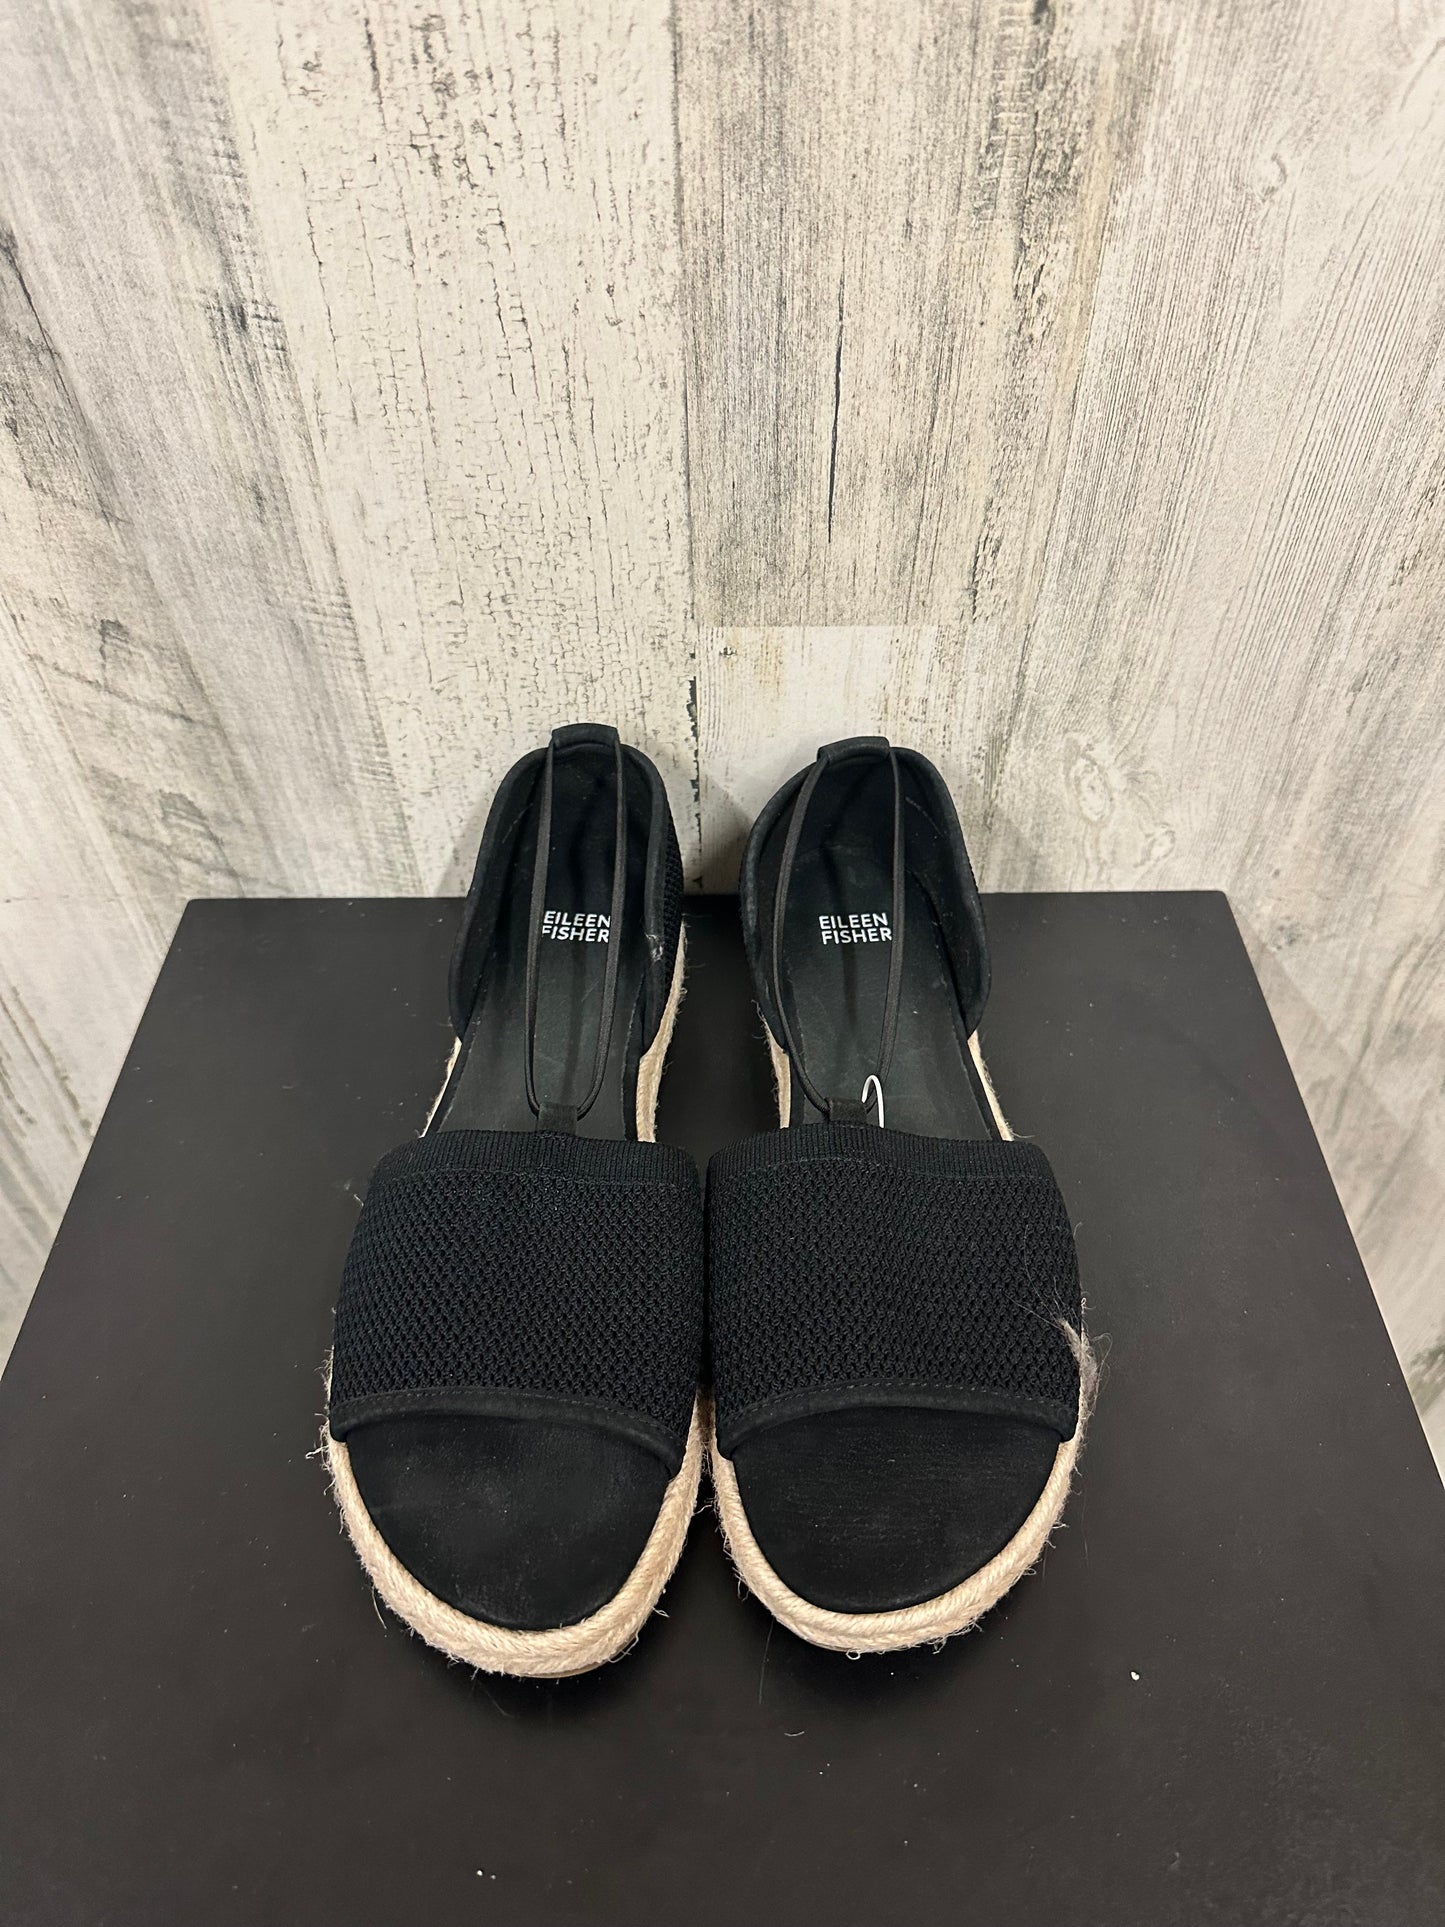 Sandals Flats By Eileen Fisher  Size: 9.5